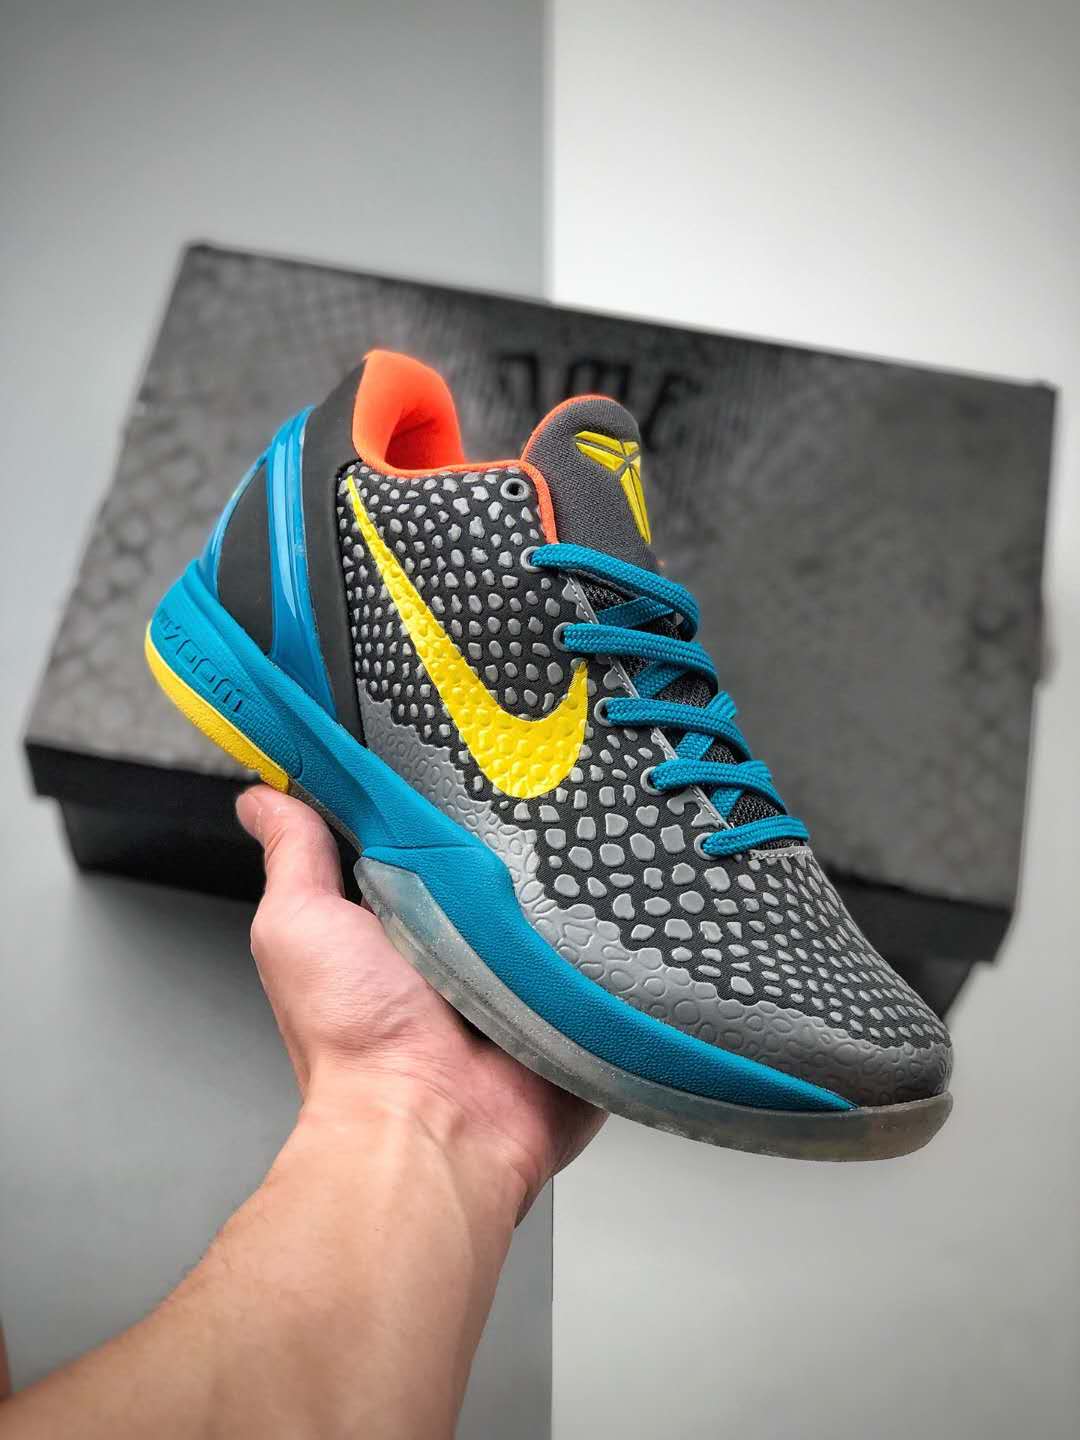 Zoom Kobe 6 Helicopter Blue Grey Total Yellow 429659-005